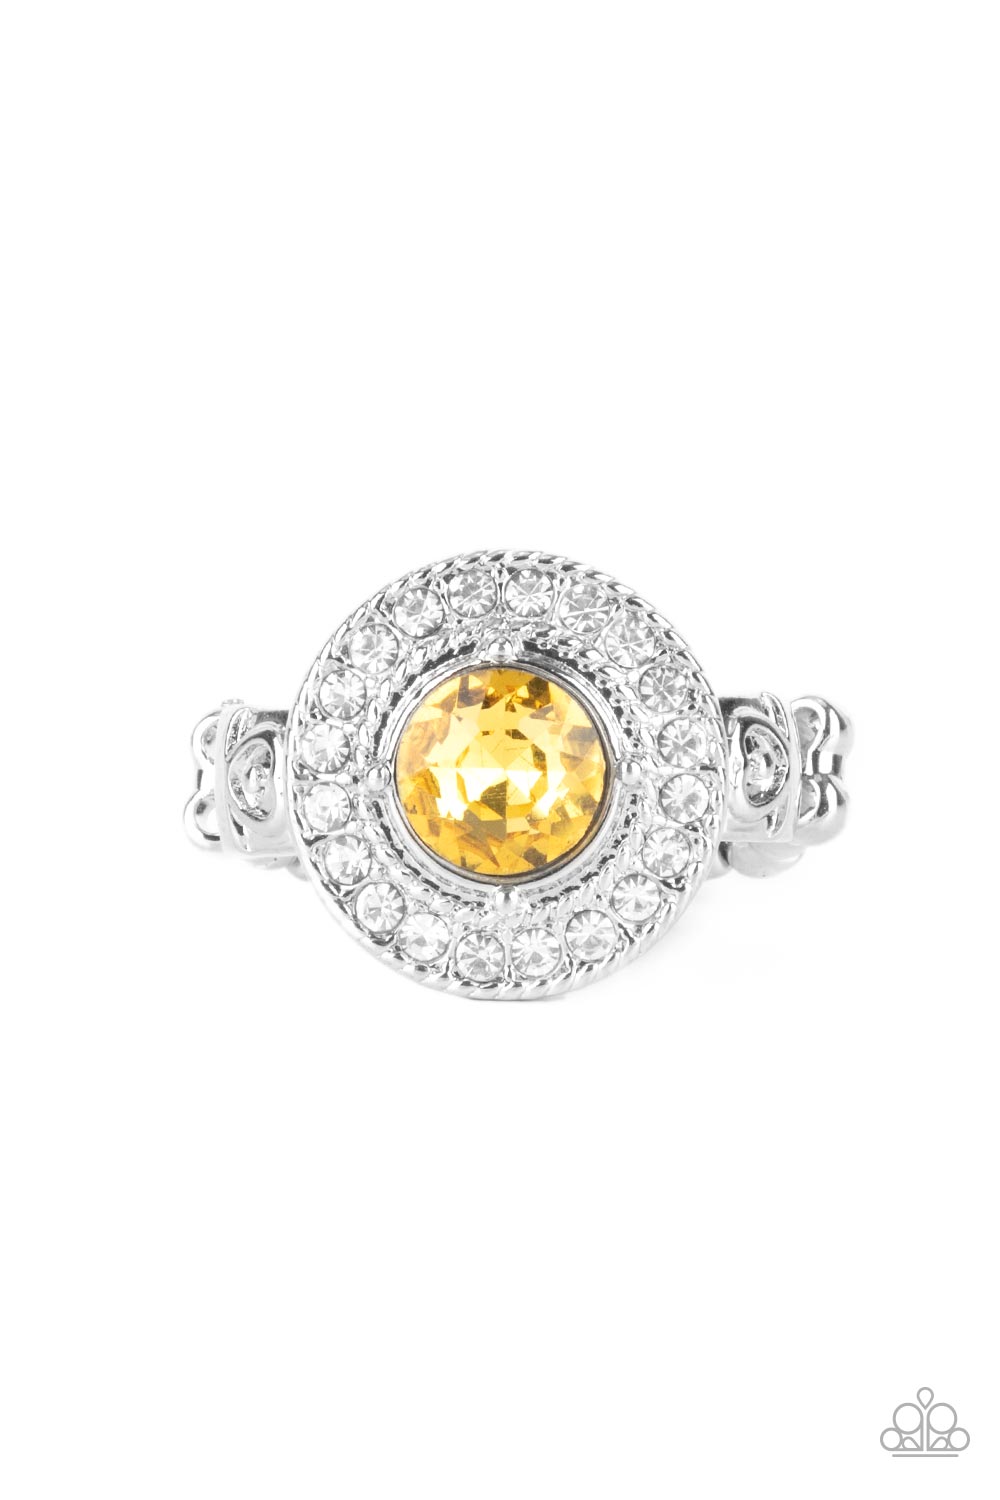 Targeted Timelessness Yellow Rhinestone Ring - Paparazzi Accessories- lightbox - CarasShop.com - $5 Jewelry by Cara Jewels